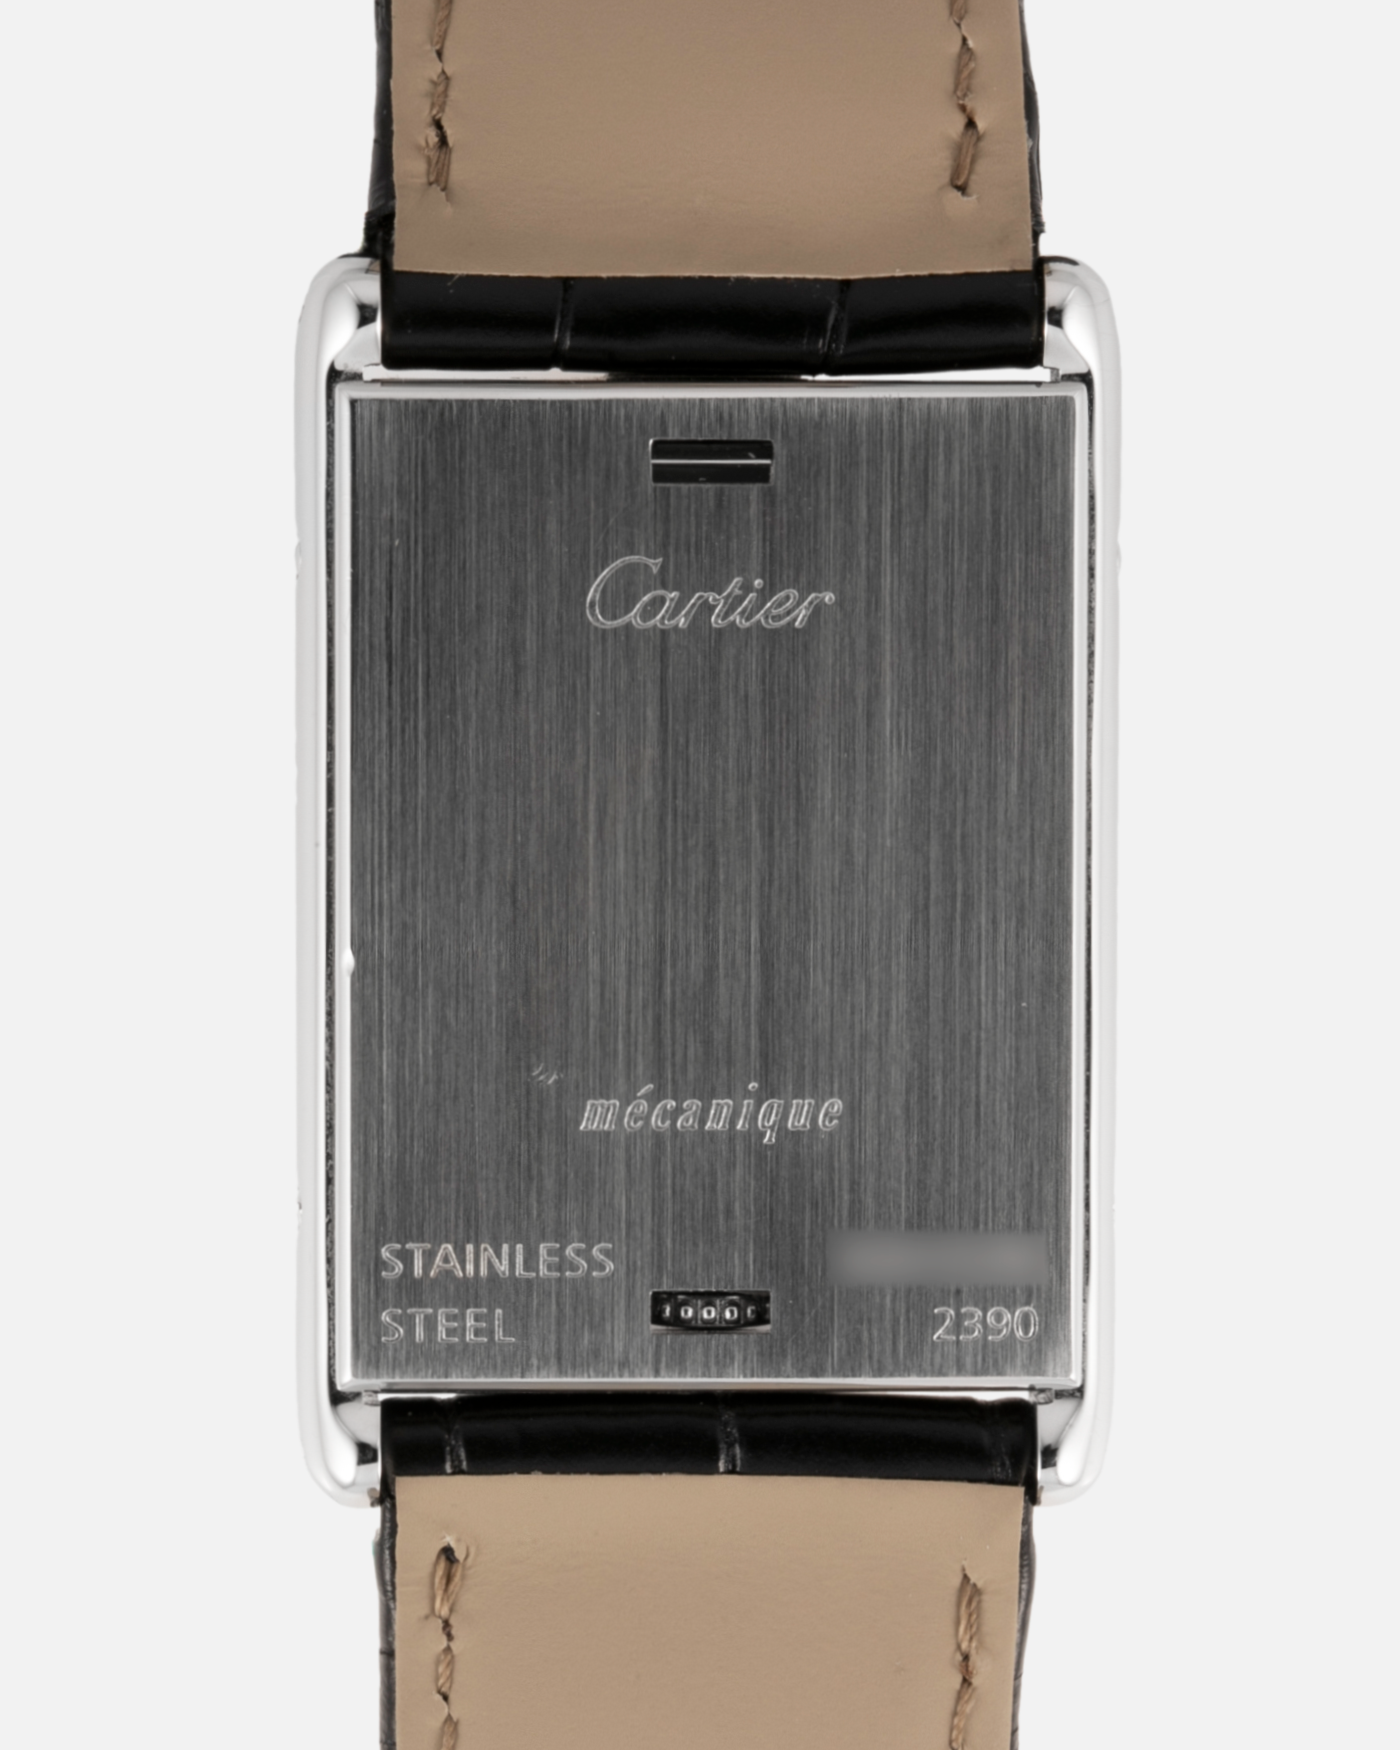 Brand: Cartier Year: 1990’s Model: Tank Basculante Reference: 2390 Material: Stainless Steel Movement: Piguet-derived Cartier cal. 050 MC Case Diameter: 26 x 38mm Strap: Black Cartier Alligator with Cartier Stainless Steel Tang Buckle